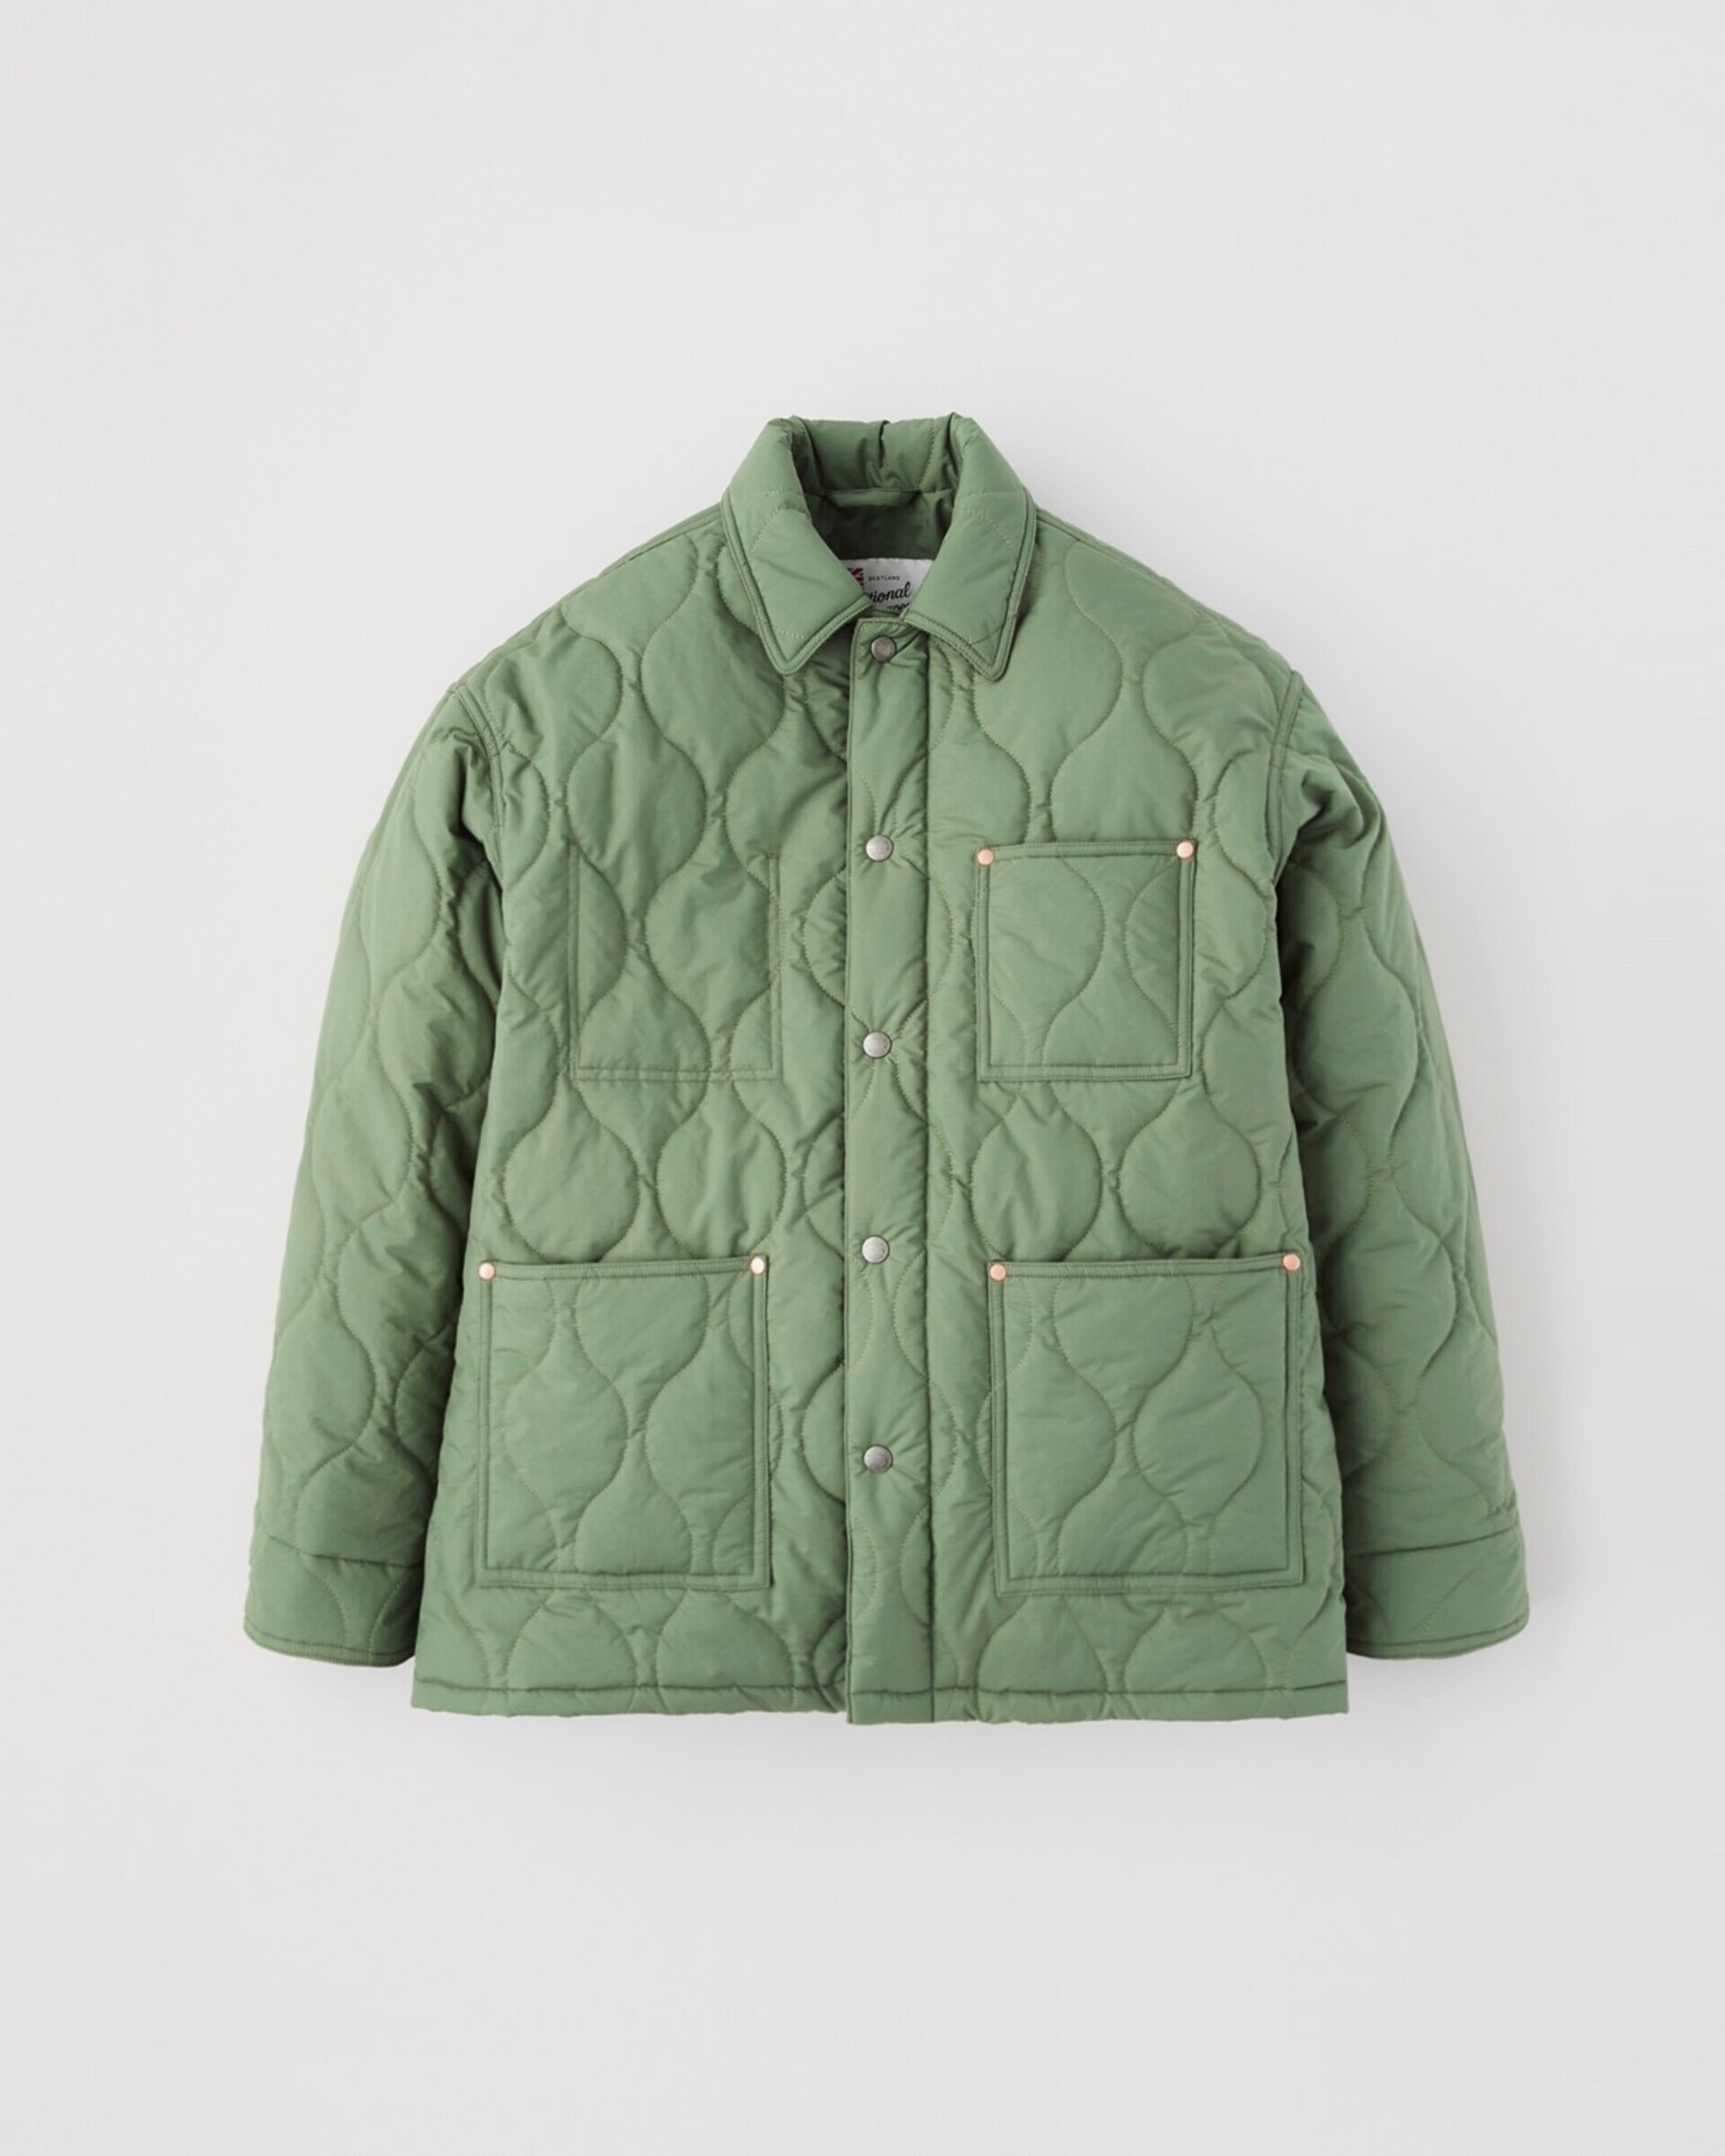 UNIONWEAR】QUILTED JACKET 002-L|Traditional Weatherwear ...